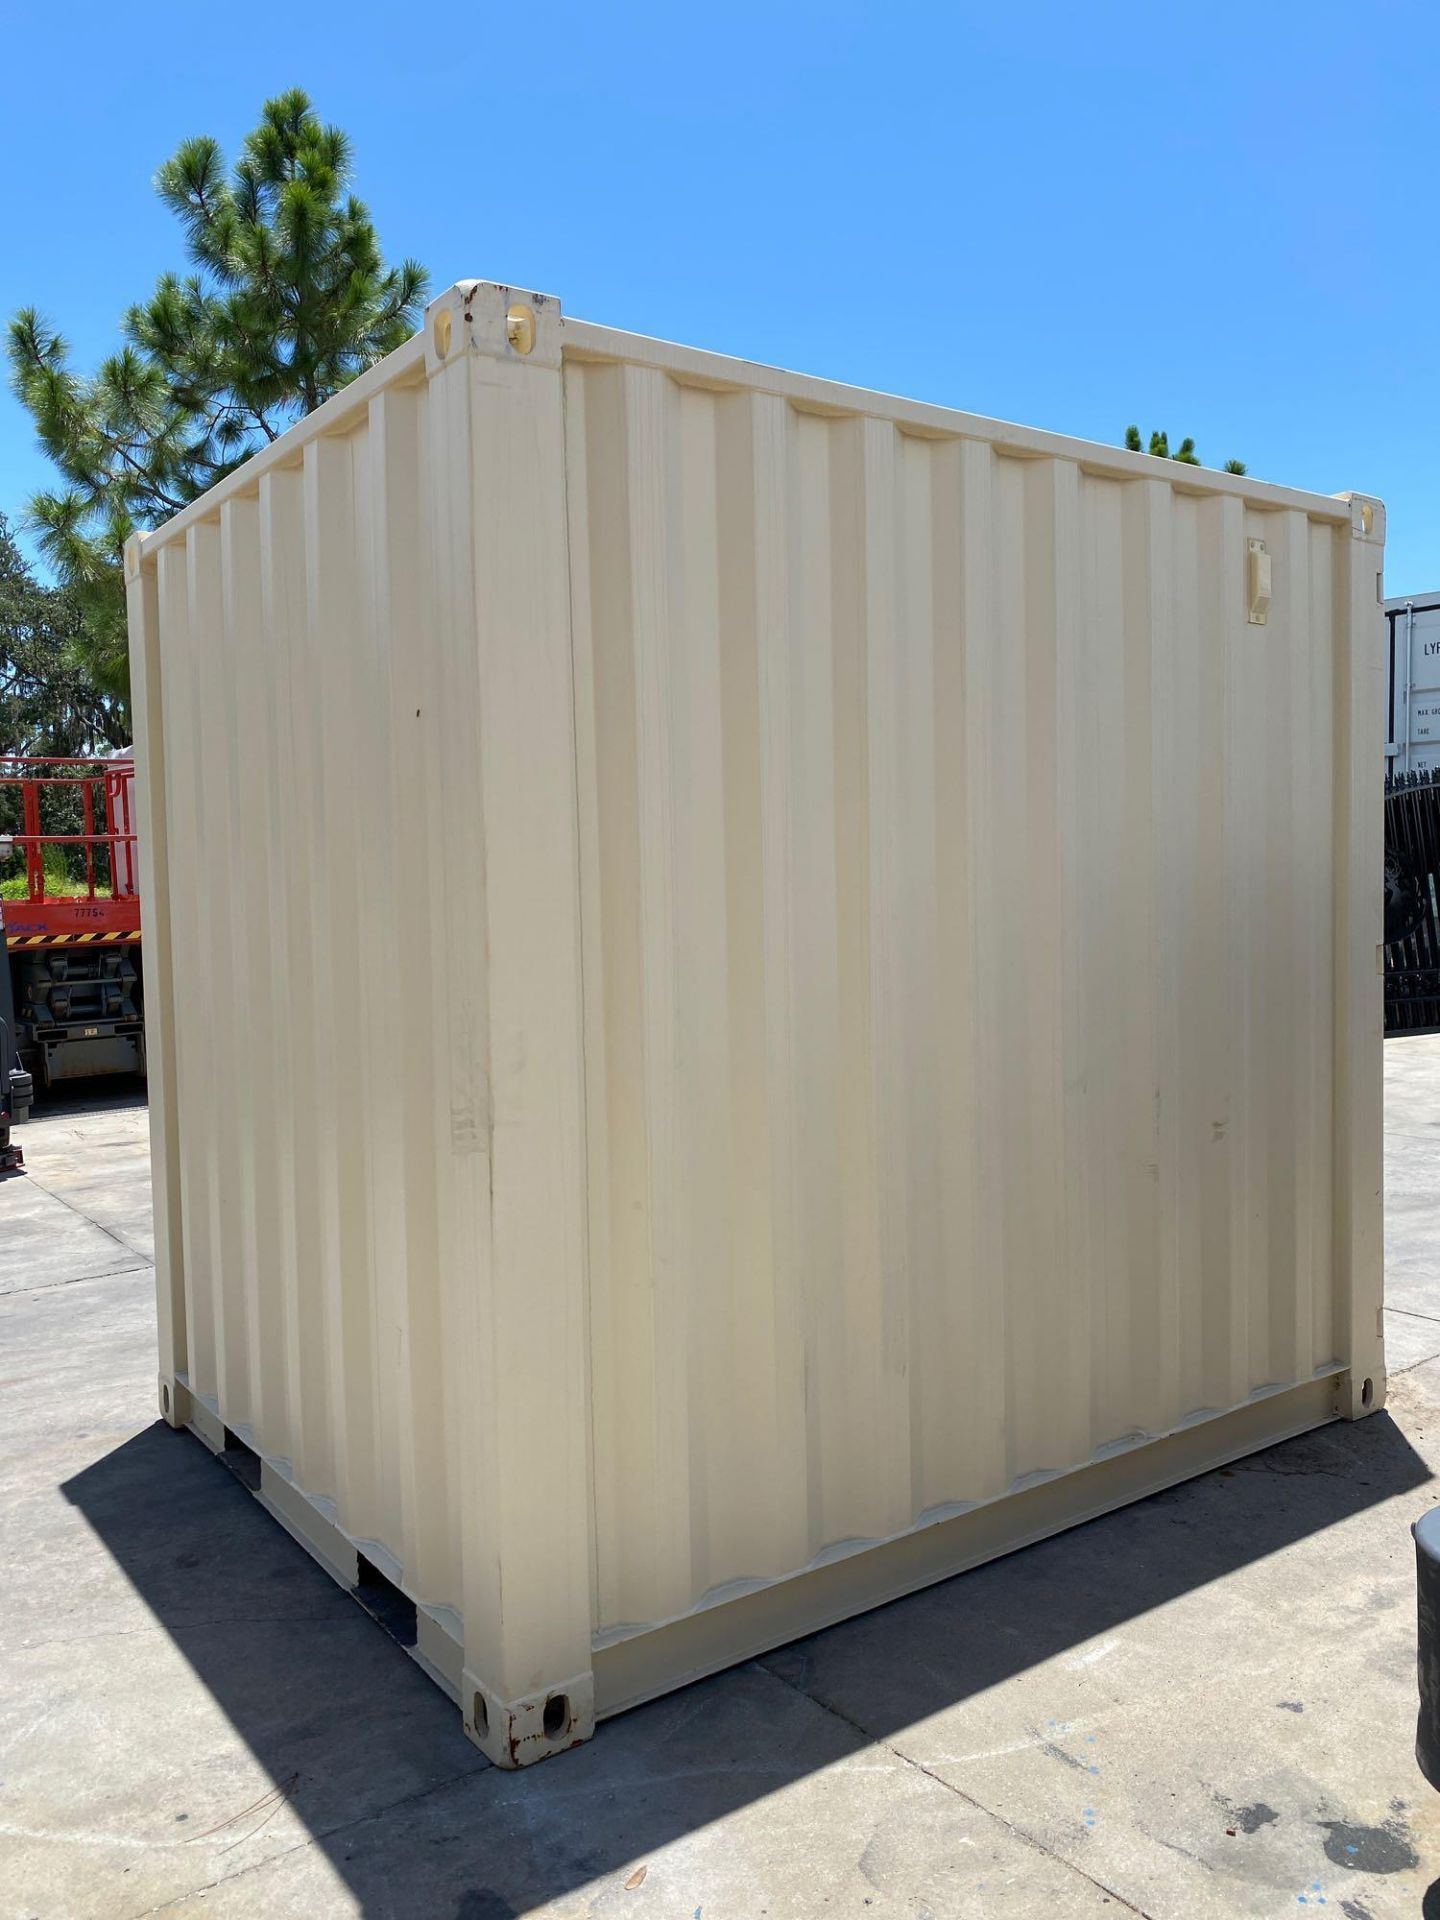 UNUSED 2020 PORTABLE OFFICE CONTAINER WITH WINDOW & SIDE DOOR. - Image 4 of 6